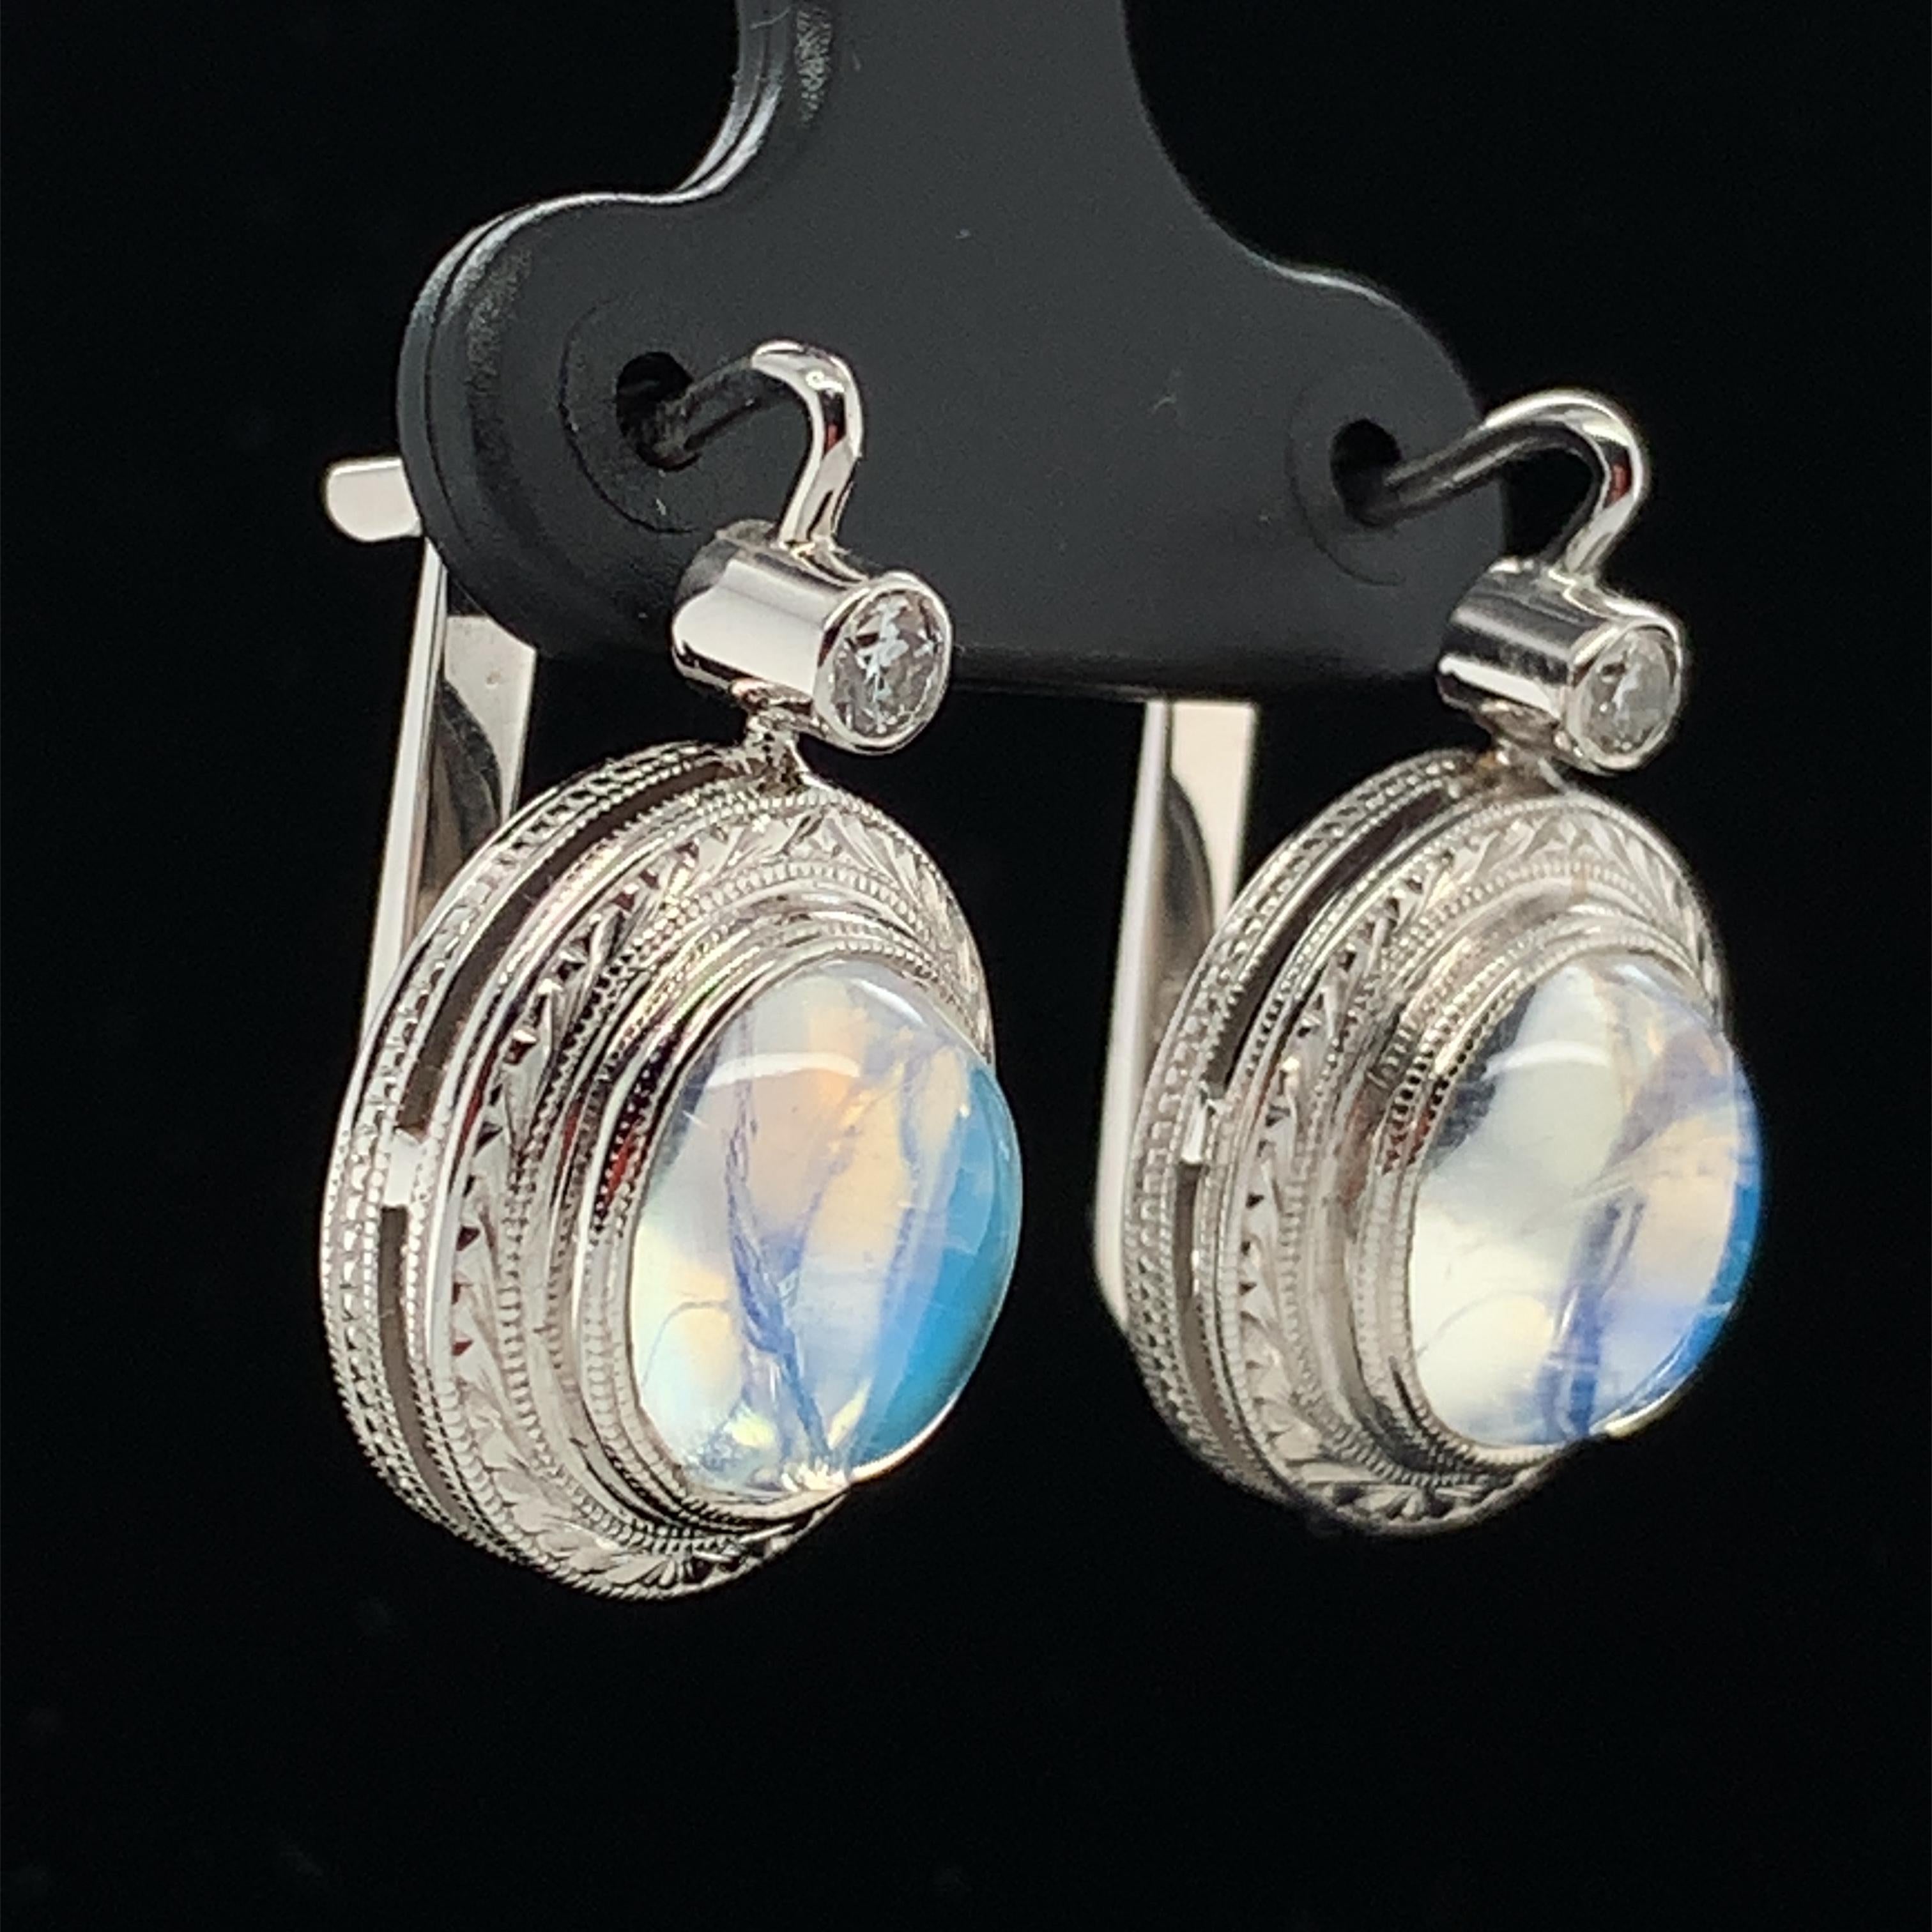 Once in a Blue Moon! Very fine quality moonstone cabochons are featured in these beautiful earrings. These moonstones are highly transparent with fine blue adularescence or 